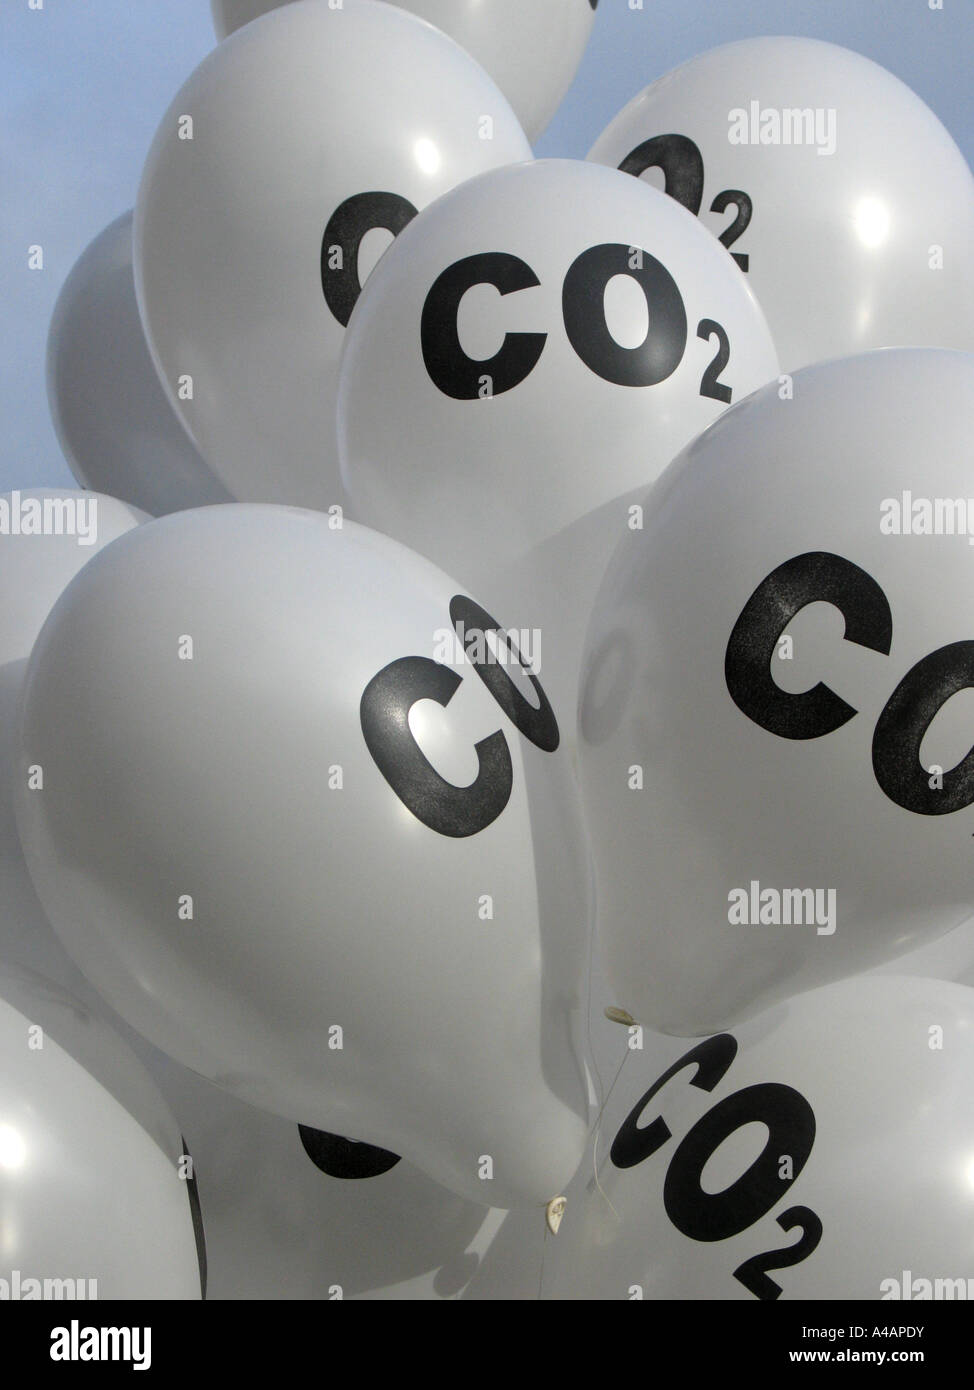 Climate change protest balloons Stock Photo